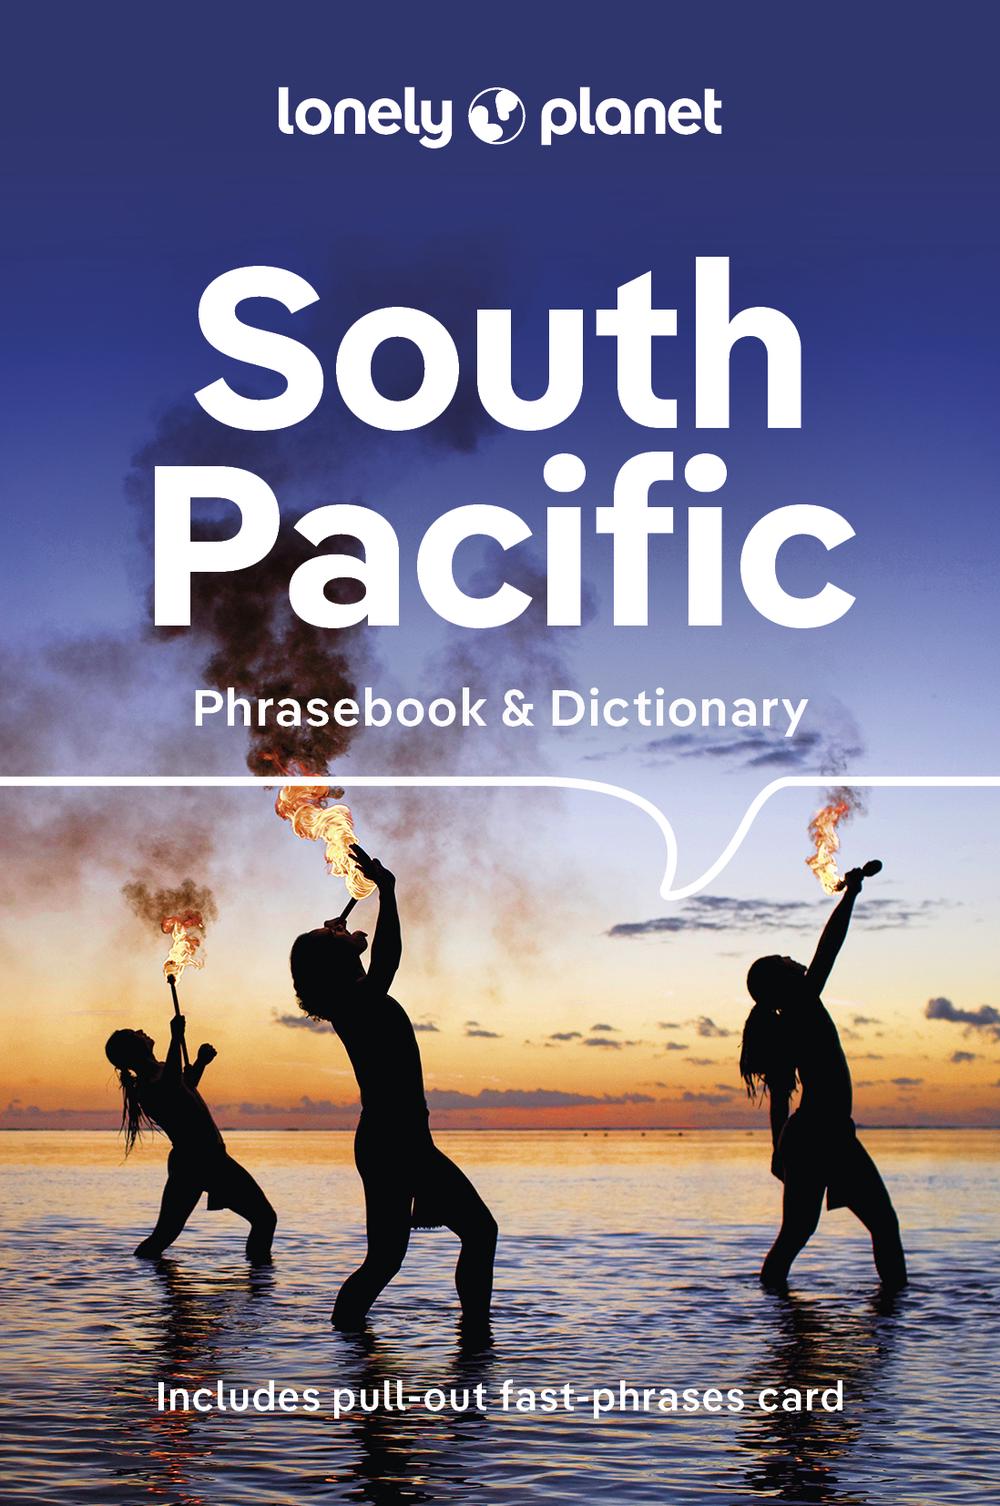 Paperback,　Lonely　at　Buy　online　The　South　by　Nile　Pacific　Planet,　Lonely　9781786571892　Planet　Phrasebook